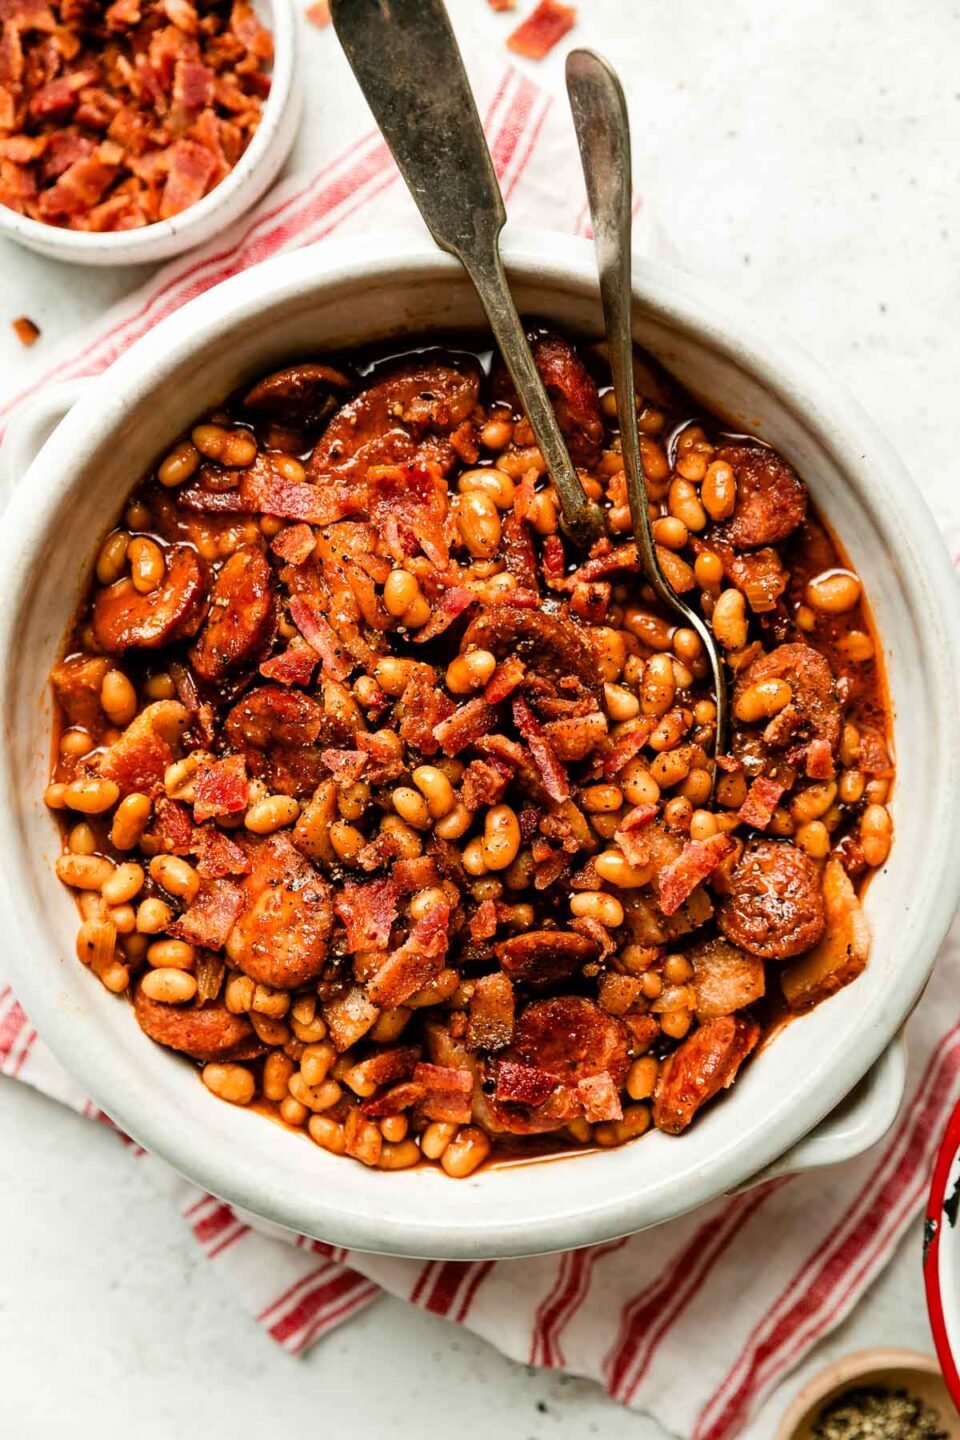 A white crock full of baked beans sits atop a red and white striped cloth on a white textured surface. A small dish of crumbled bacon sits next to it.